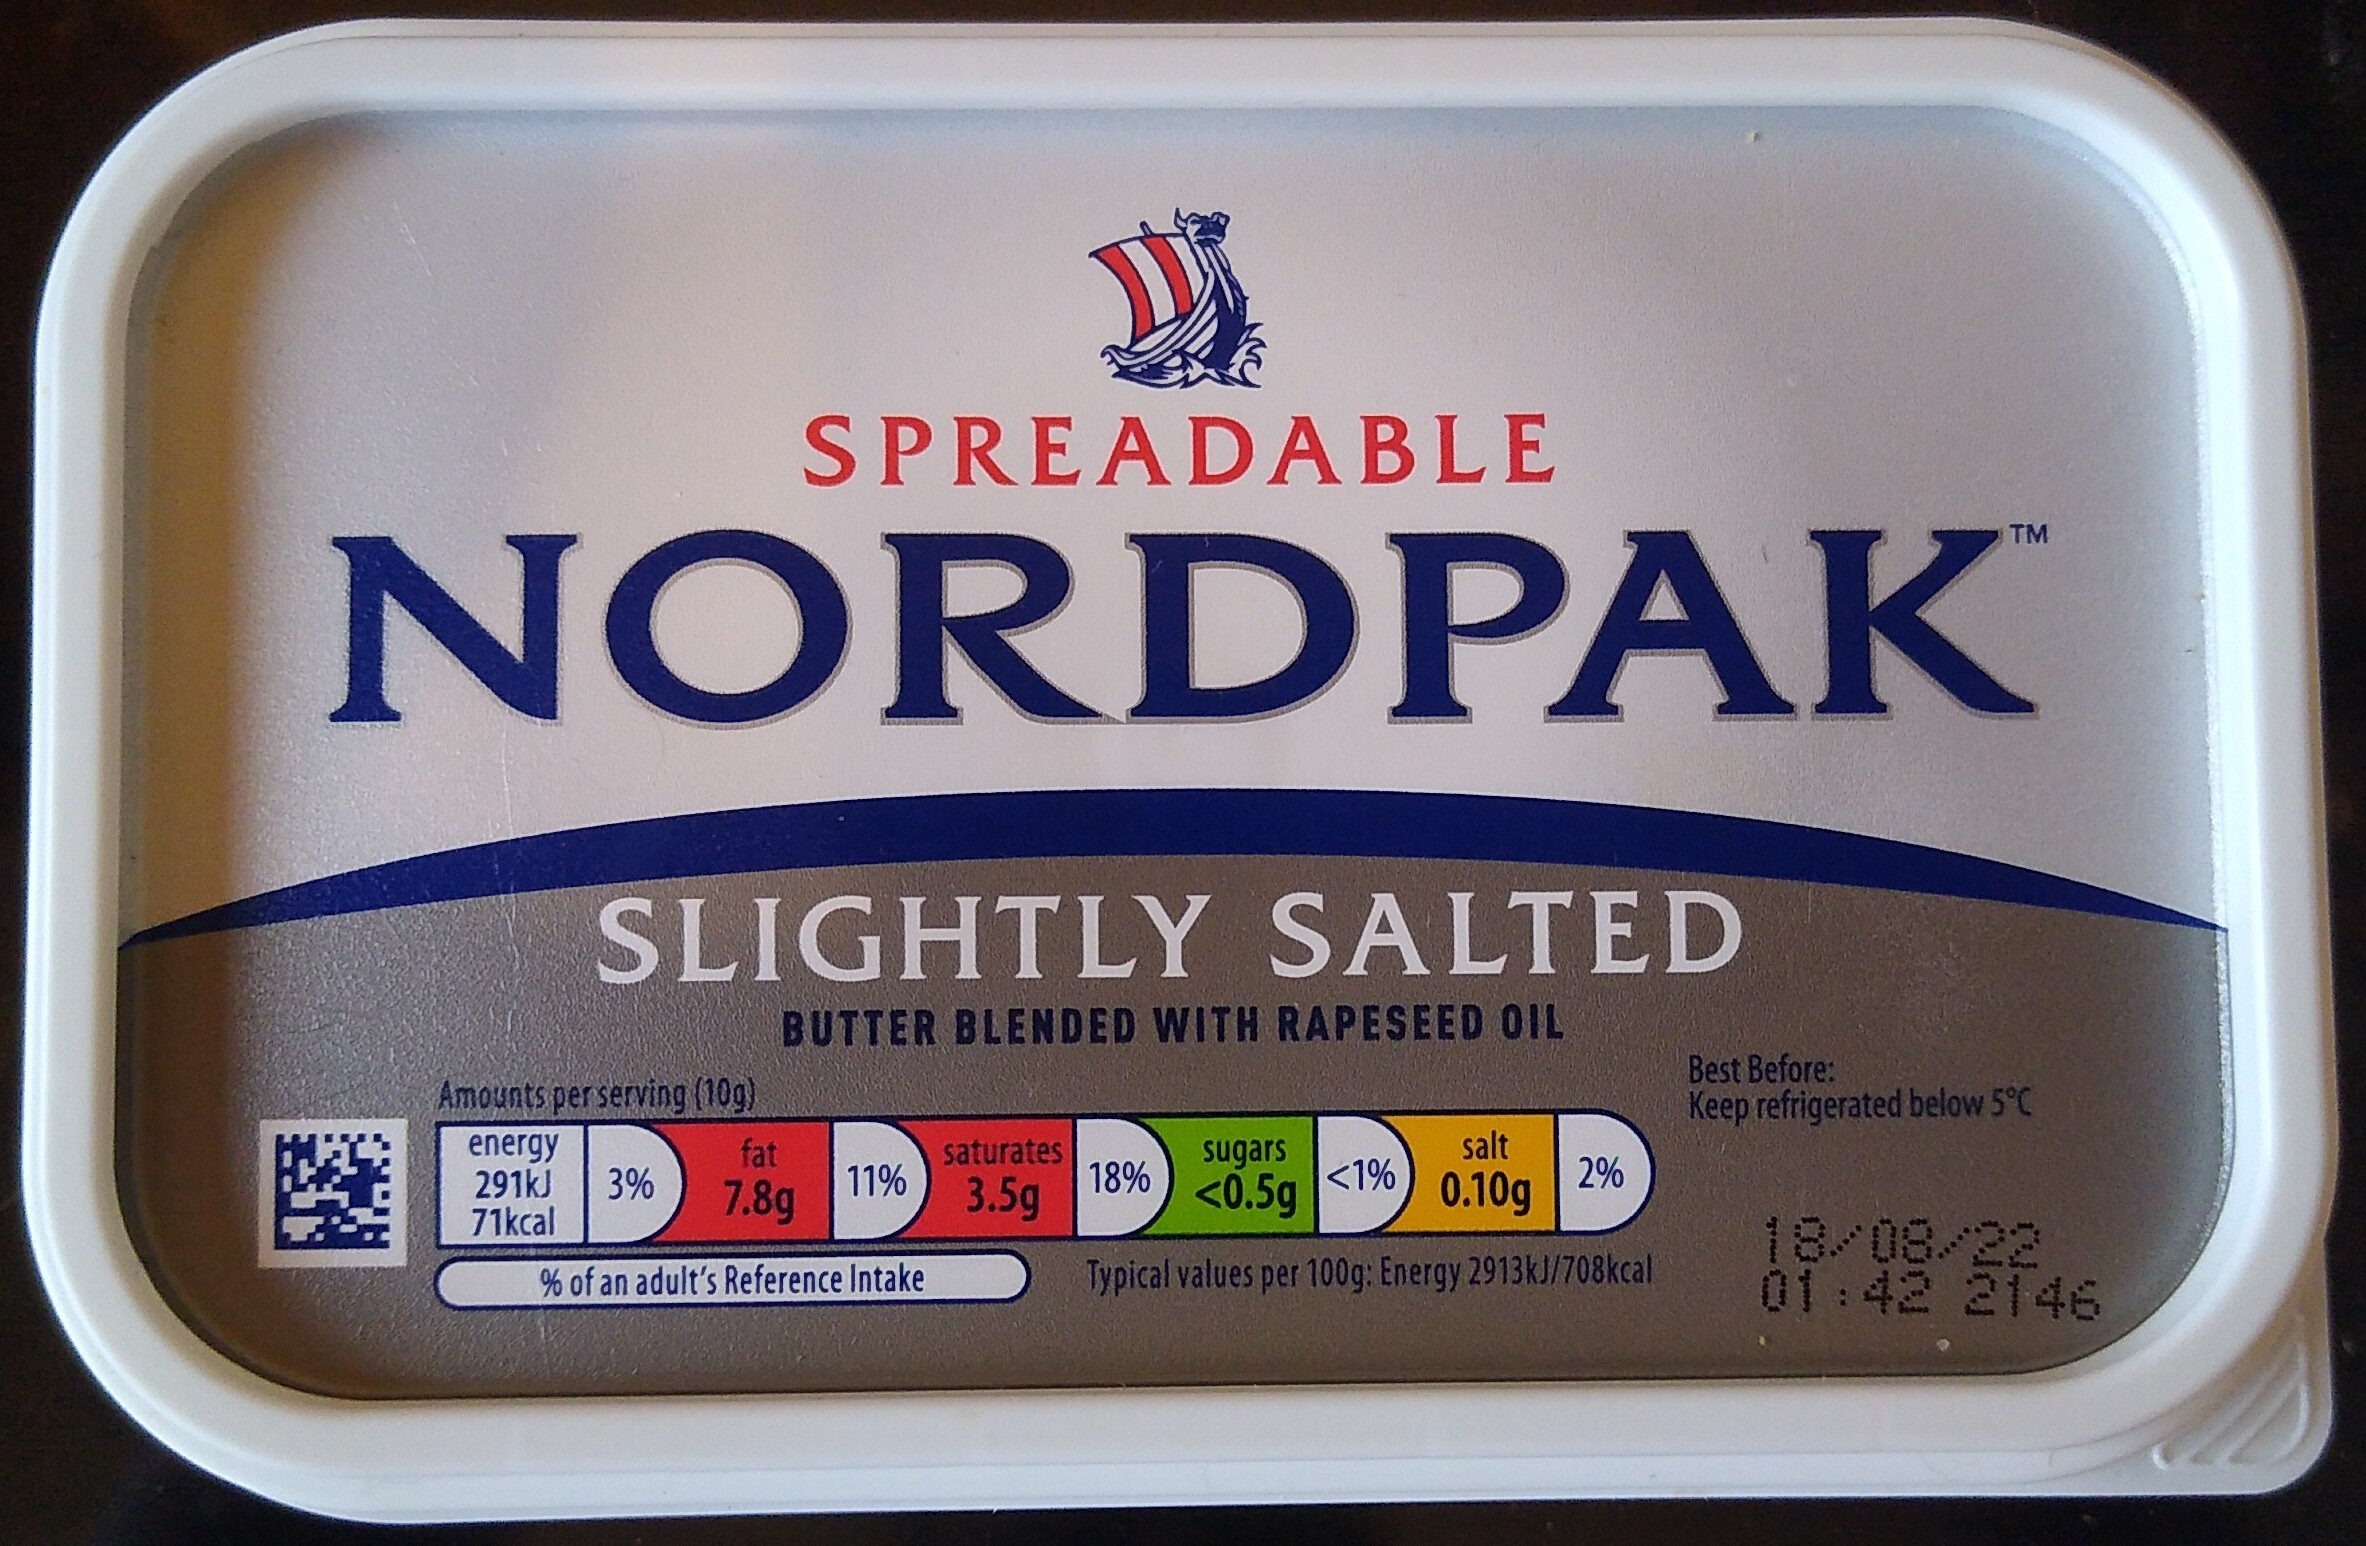 Nordpak Slightly Salted Spreadable Butter - Product - en